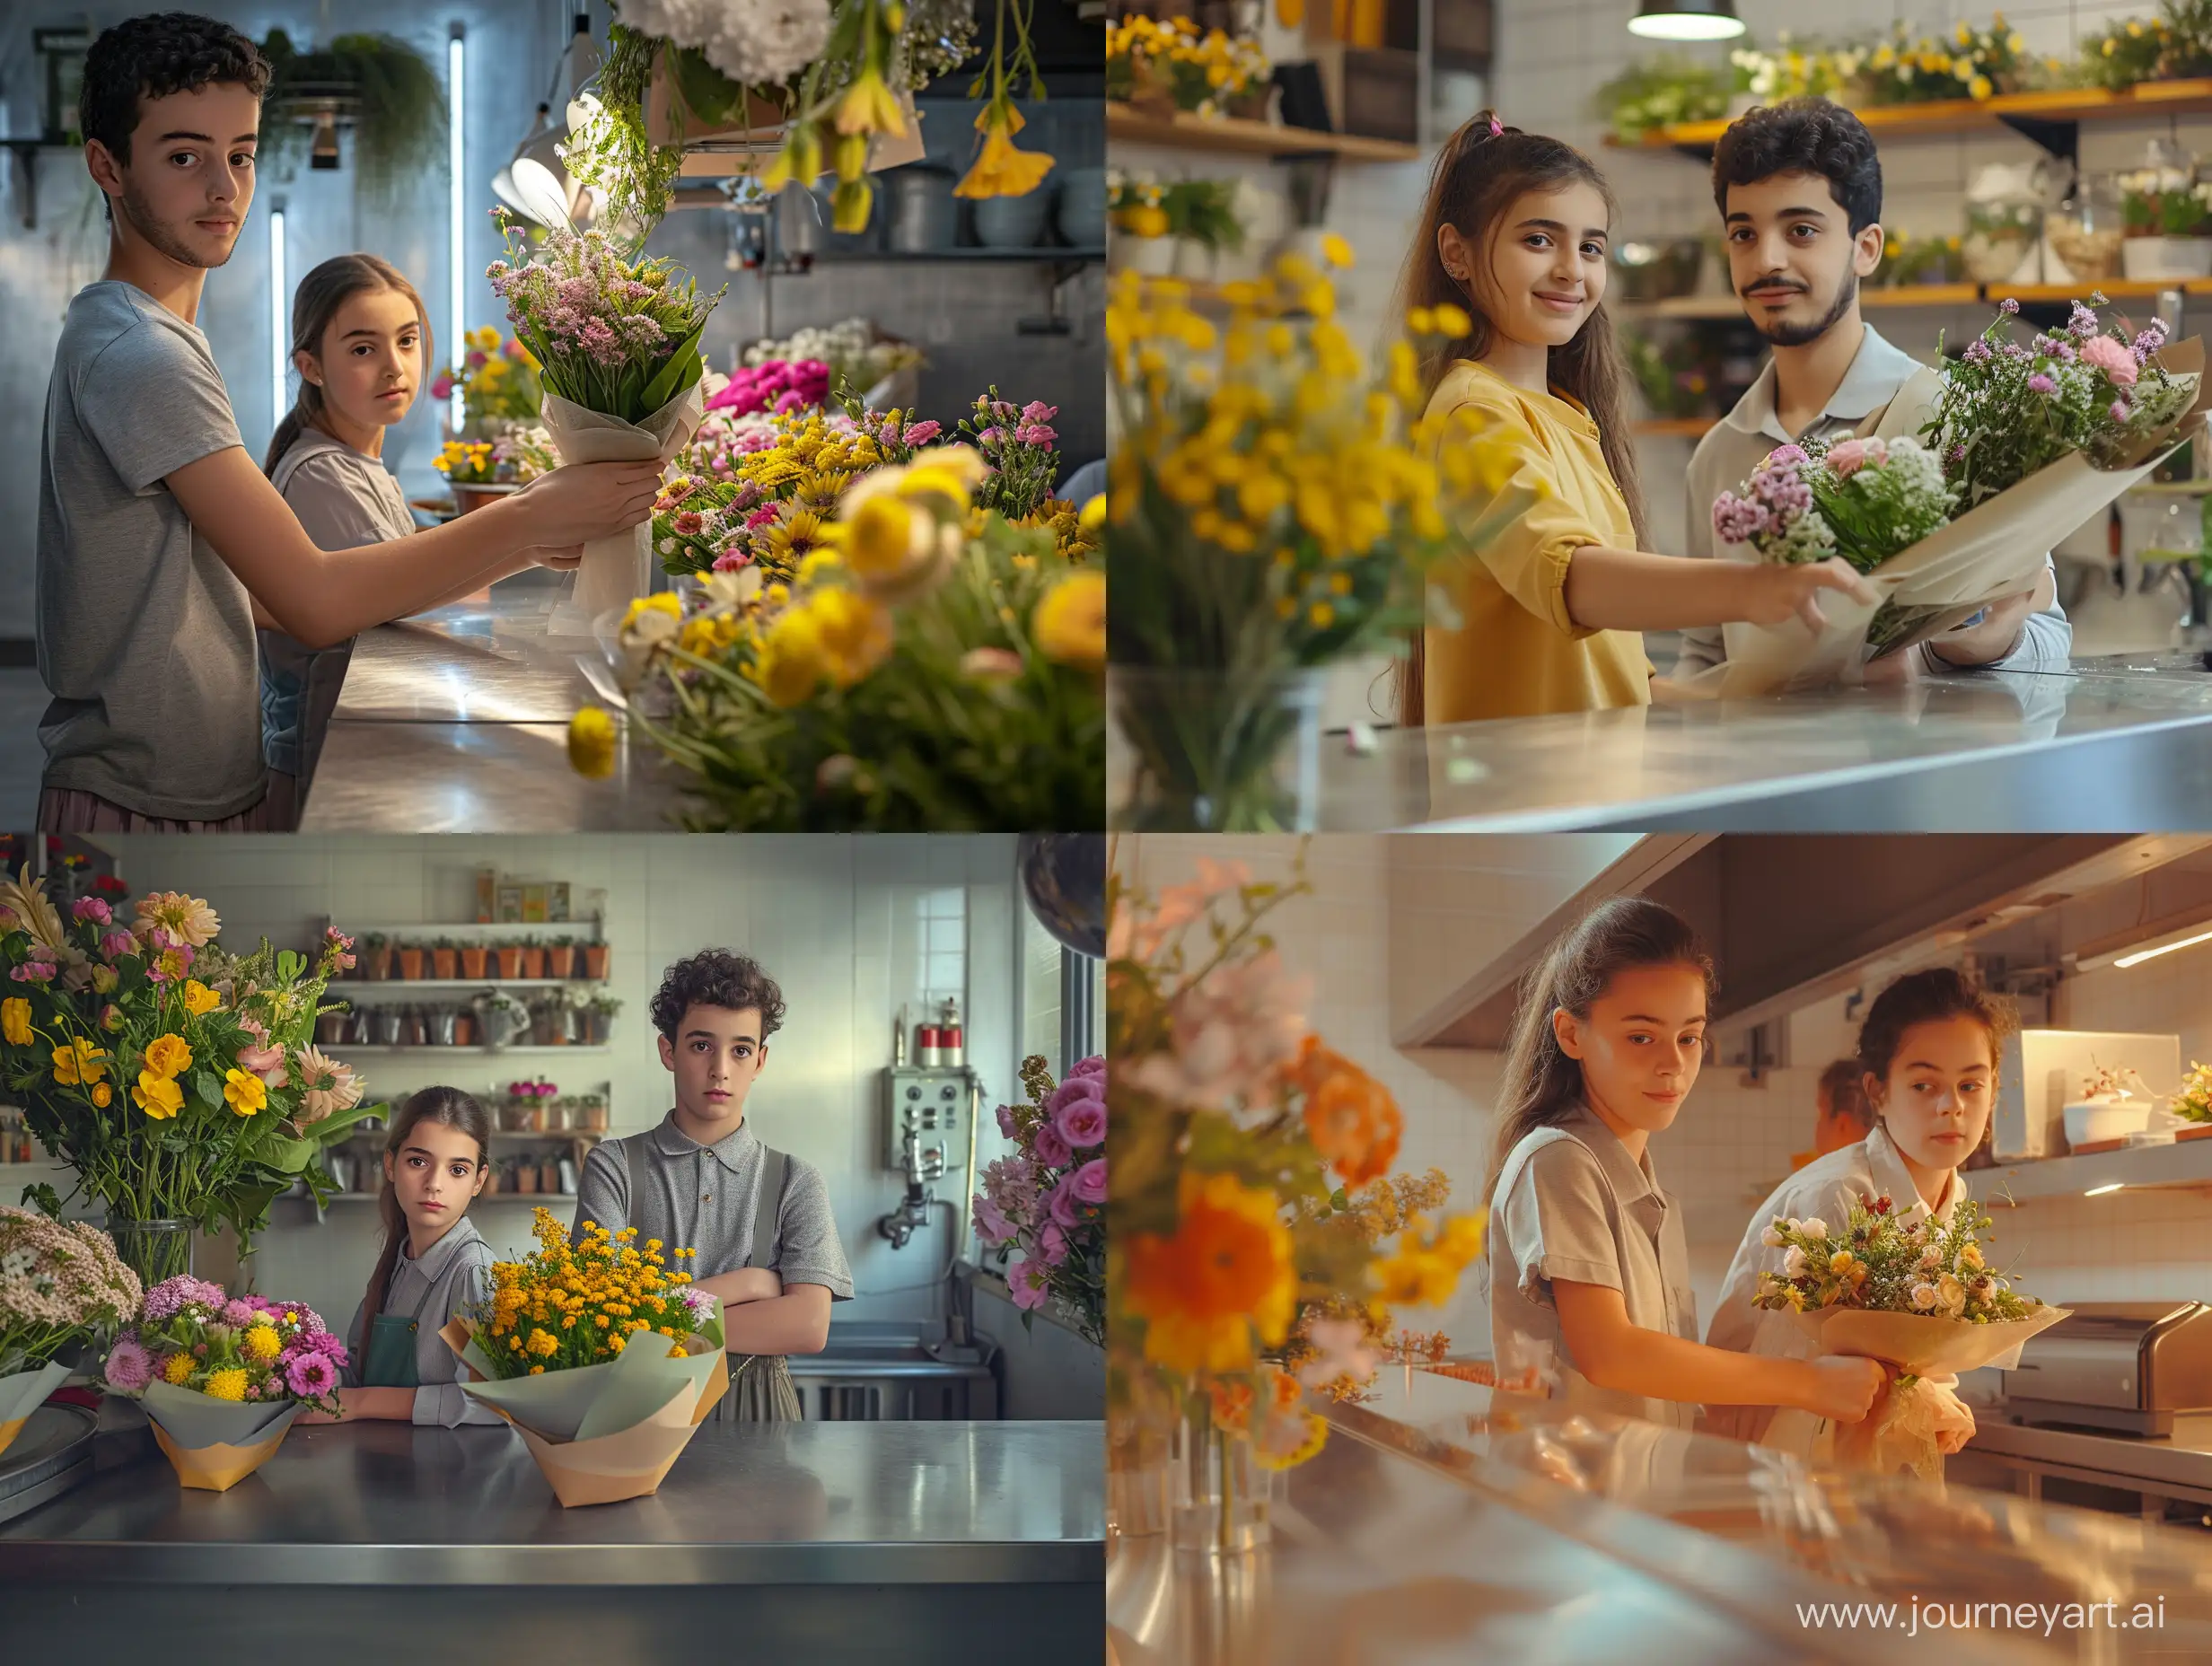 
Two young girls working in a flower shop, they’re at the counter putting in a new bouquet, ct in a studio, the man look at camera and smile, hyper-realistic, cinematic sytle, light silver and yellow, film/video, year 2023, in Galicia Spain


--ar

